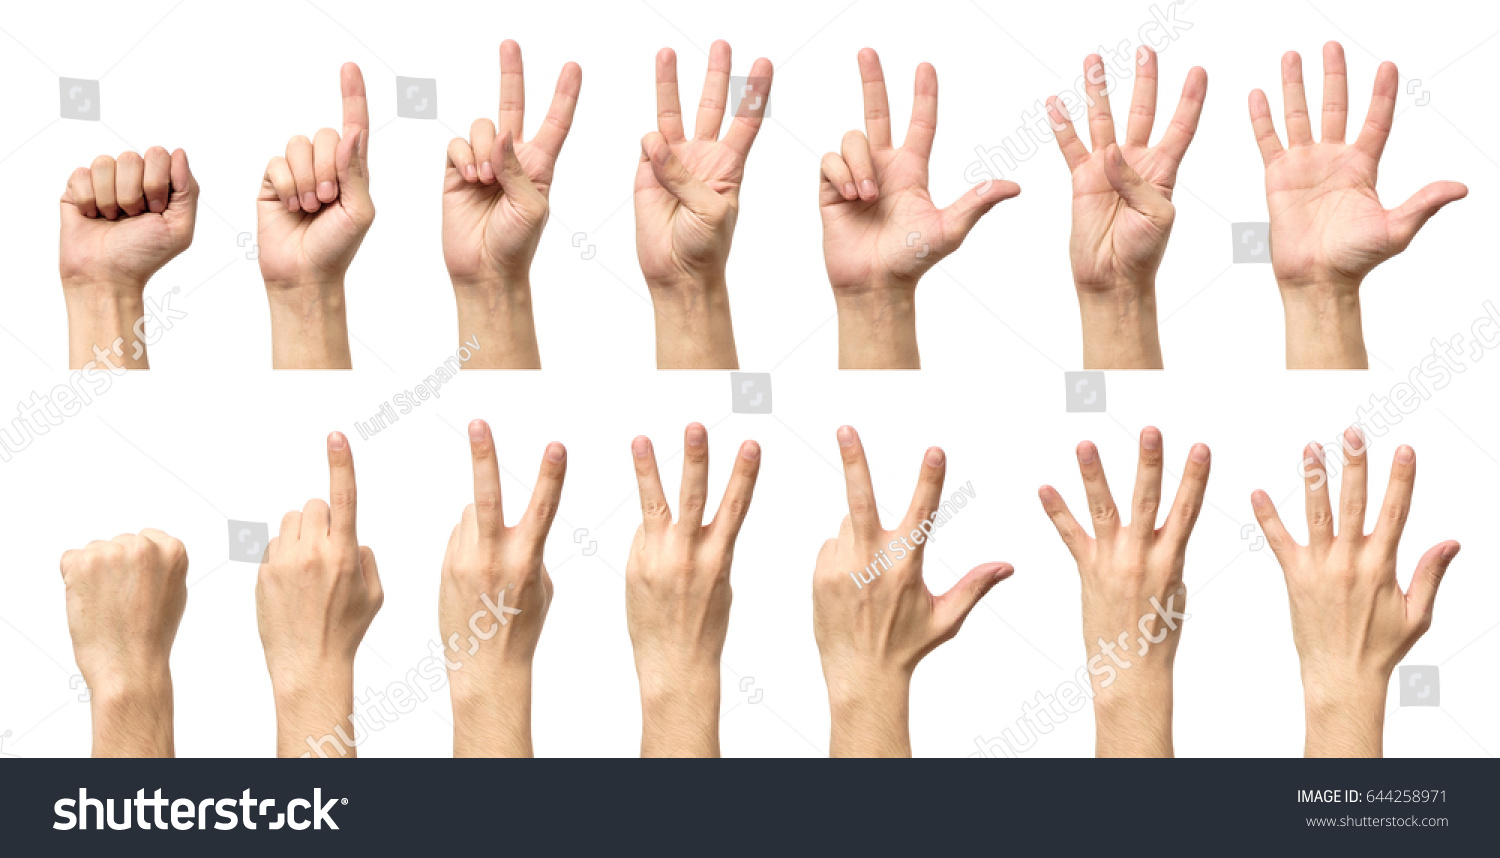 Male hands counting from zero to five isolated on white background #644258971